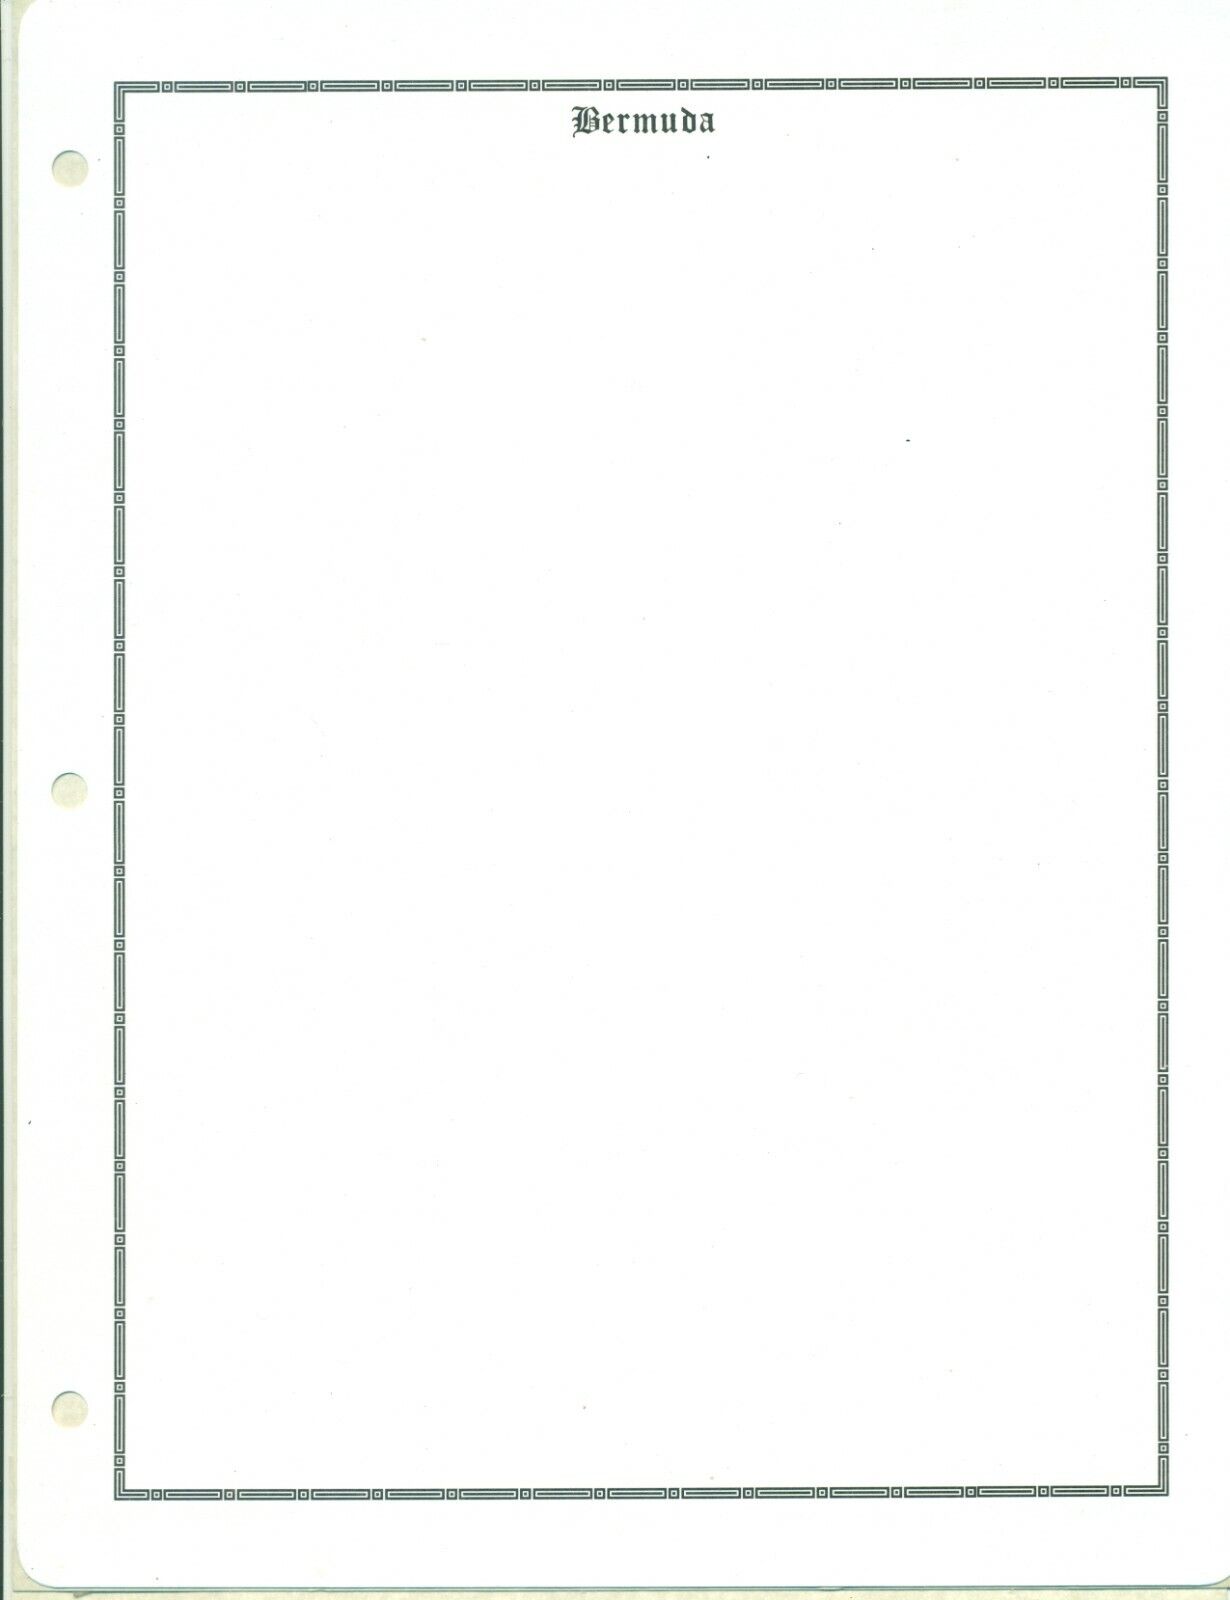 San Francisco Mall LOT 887 THE BERMUDA STAMP half 10 BLANK PAGES ALBUM